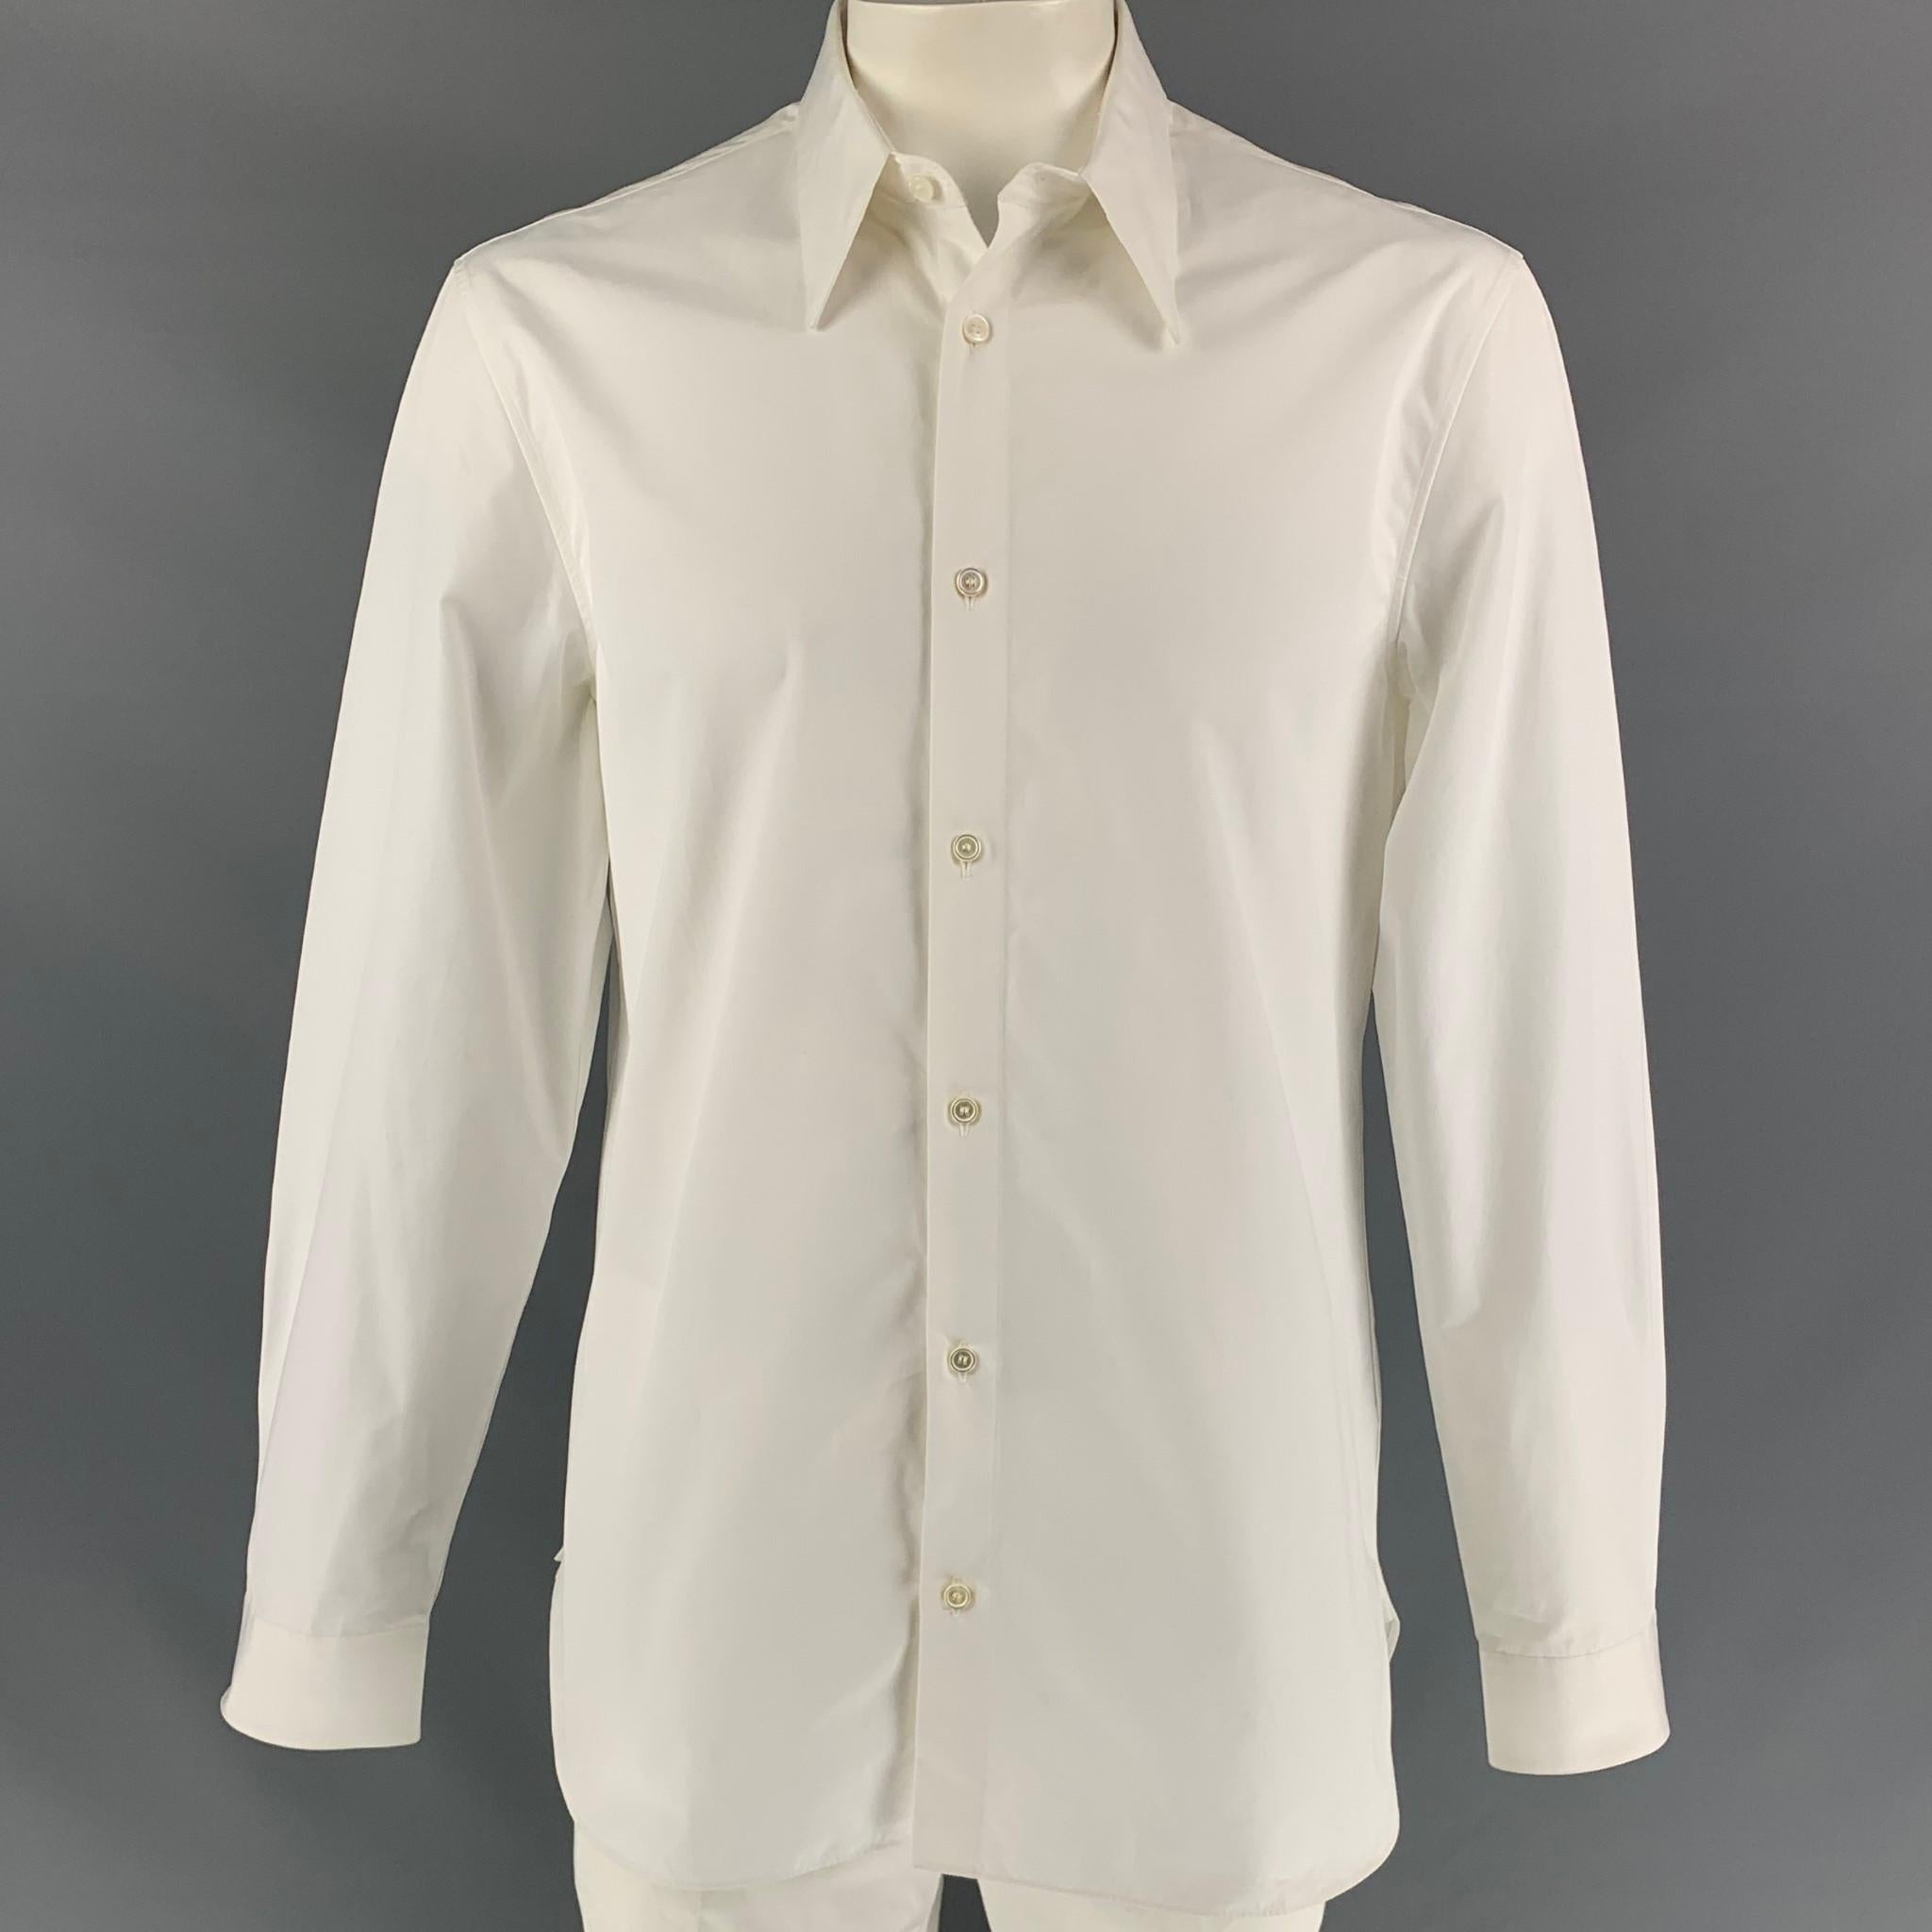 CALVIN KLEIN 205W39NYC long sleeve shirt comes in a white cotton with a back red & black graphic print of Andy Warhol featuring a pointed collar and a button up closure. Made in Italy. 

Very Good Pre-Owned Condition.
Marked: